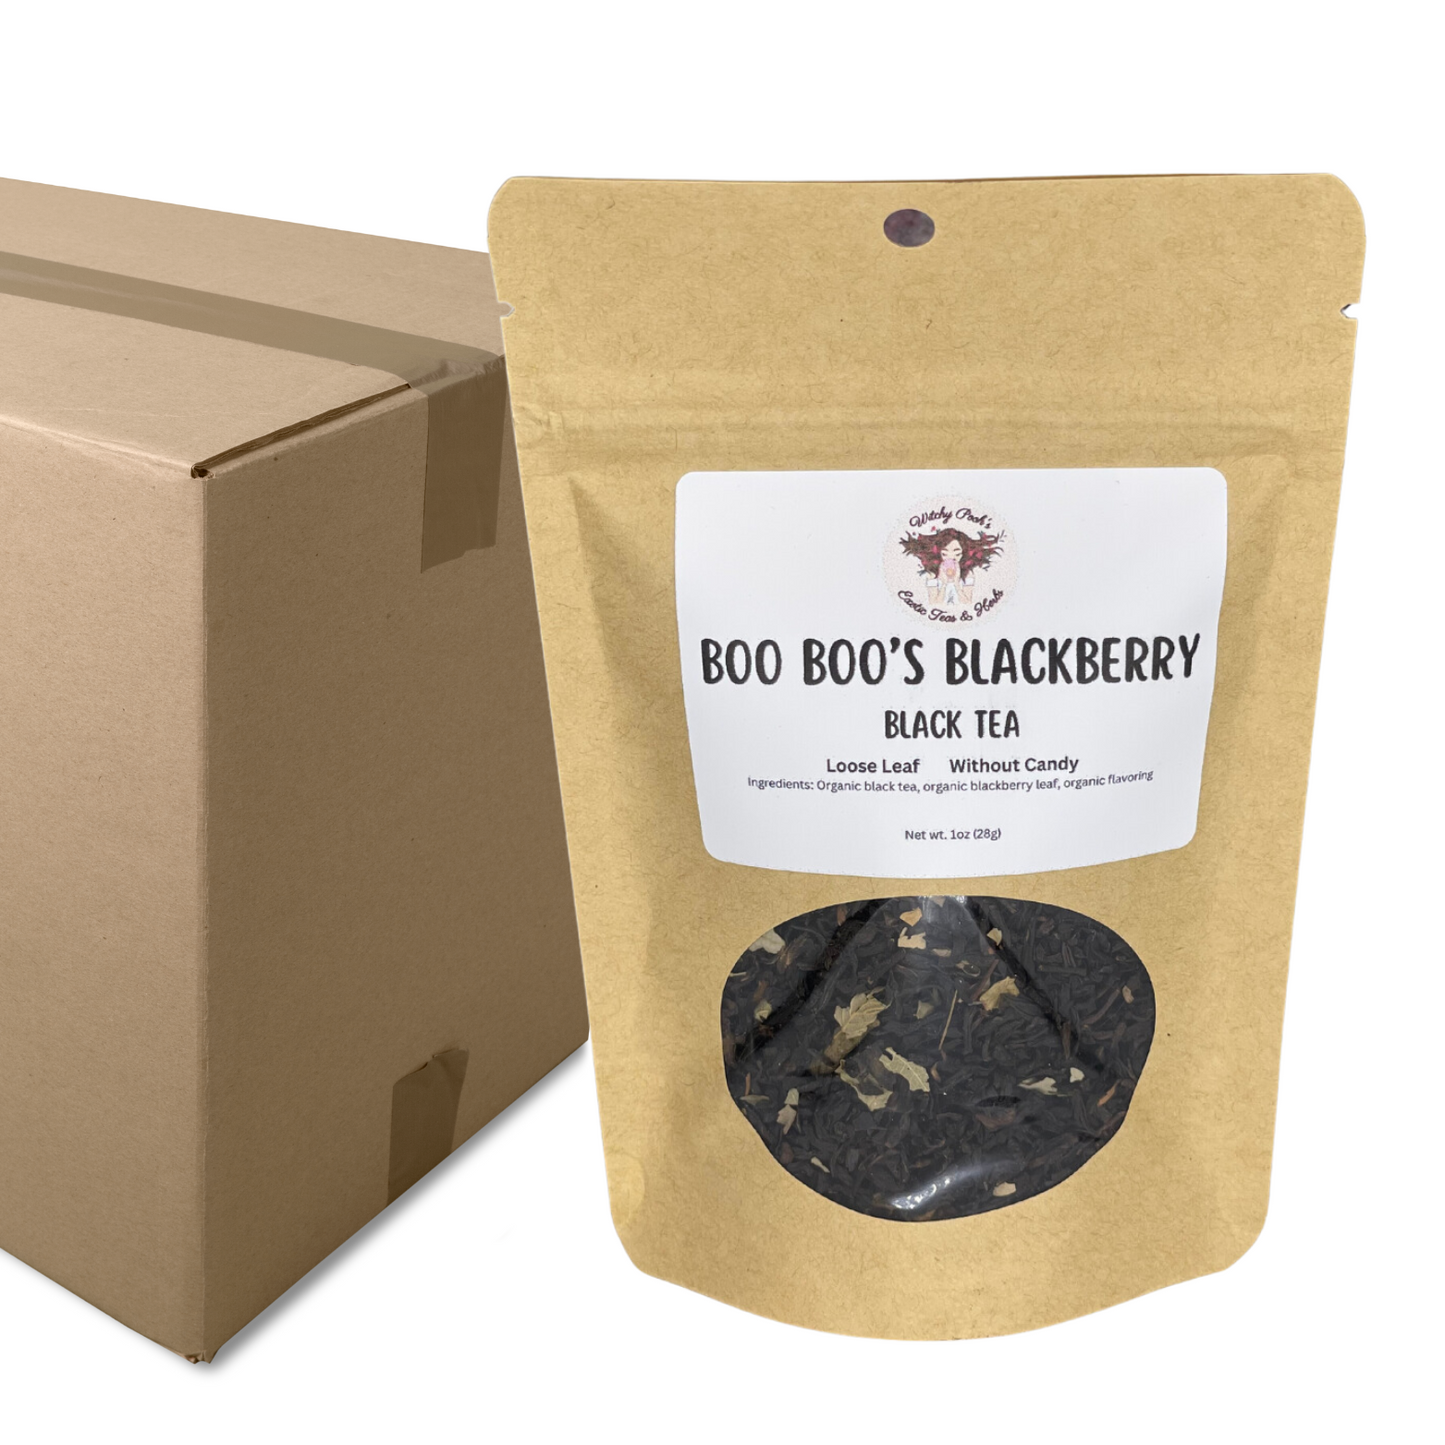 Witchy Pooh's Boo Boo's Blackberry Flavored Loose Leaf Black Tea